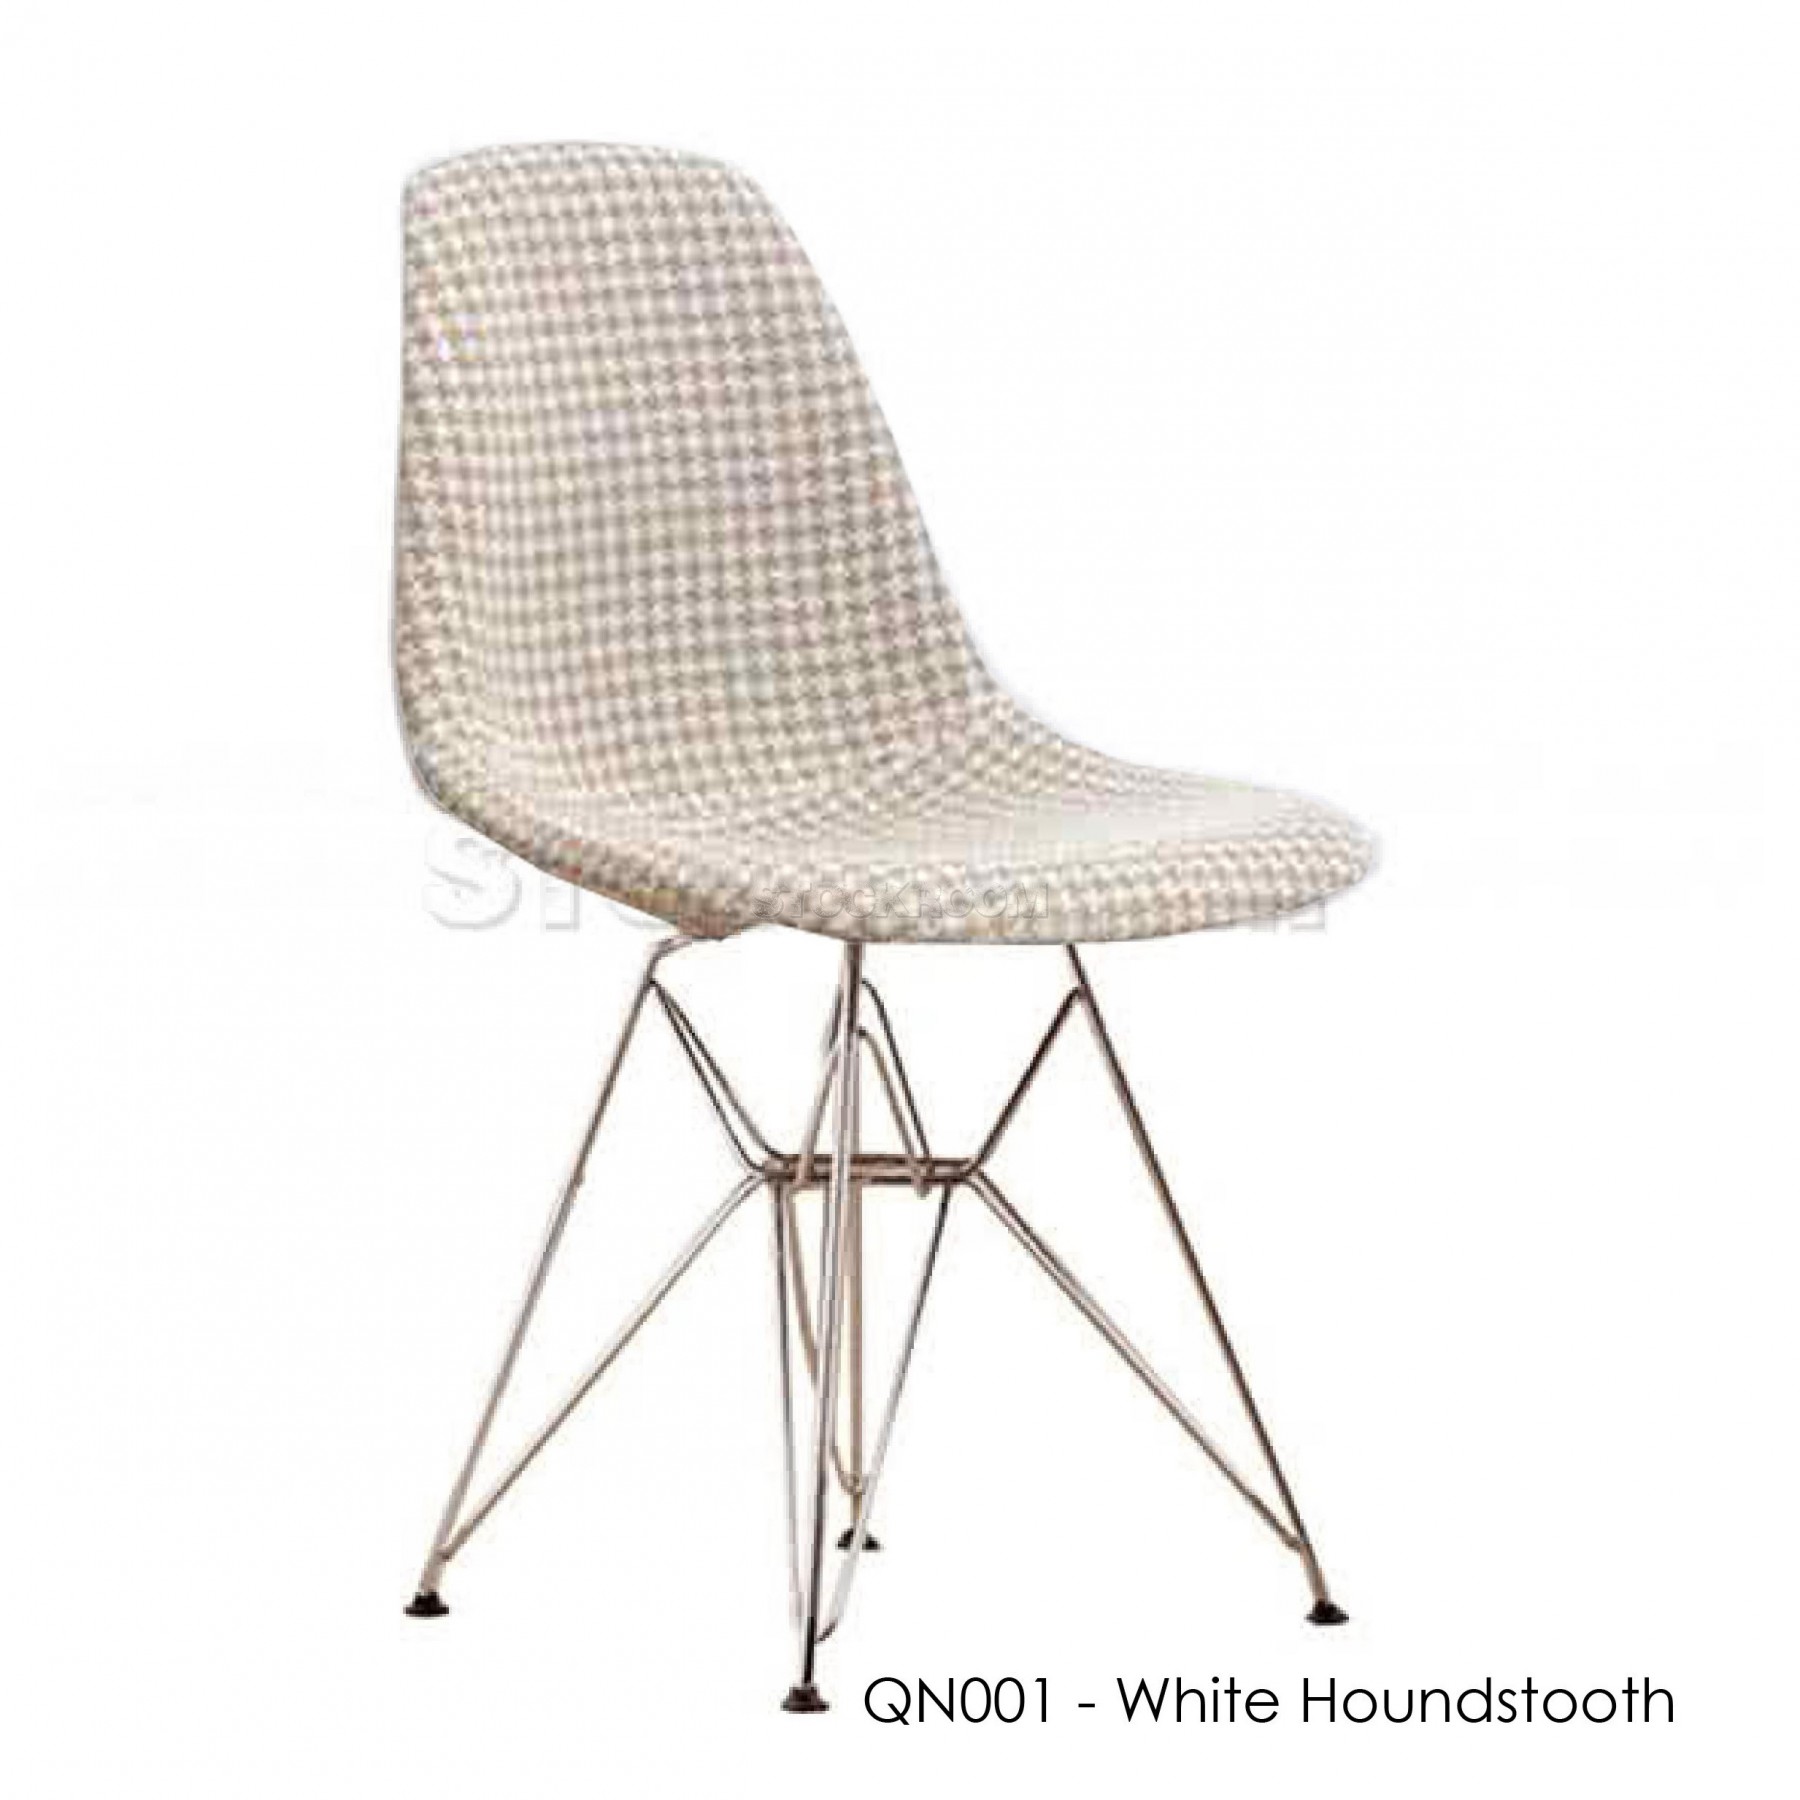 Charles Eames DSR Style Dining Chair - Upholstered - Full Fabric